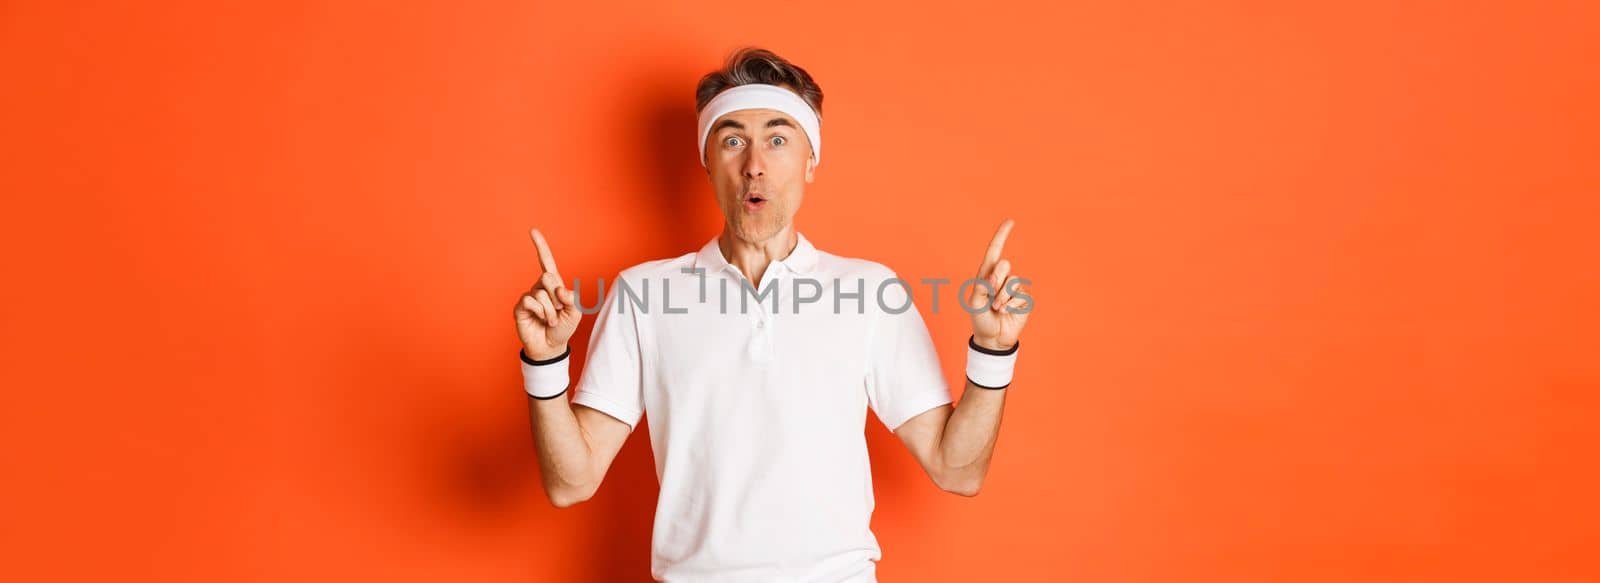 Portrait of handsome middle-aged guy in sports clothing, pointing fingers up, showing promo banner about gym or workout, standing over orange background.